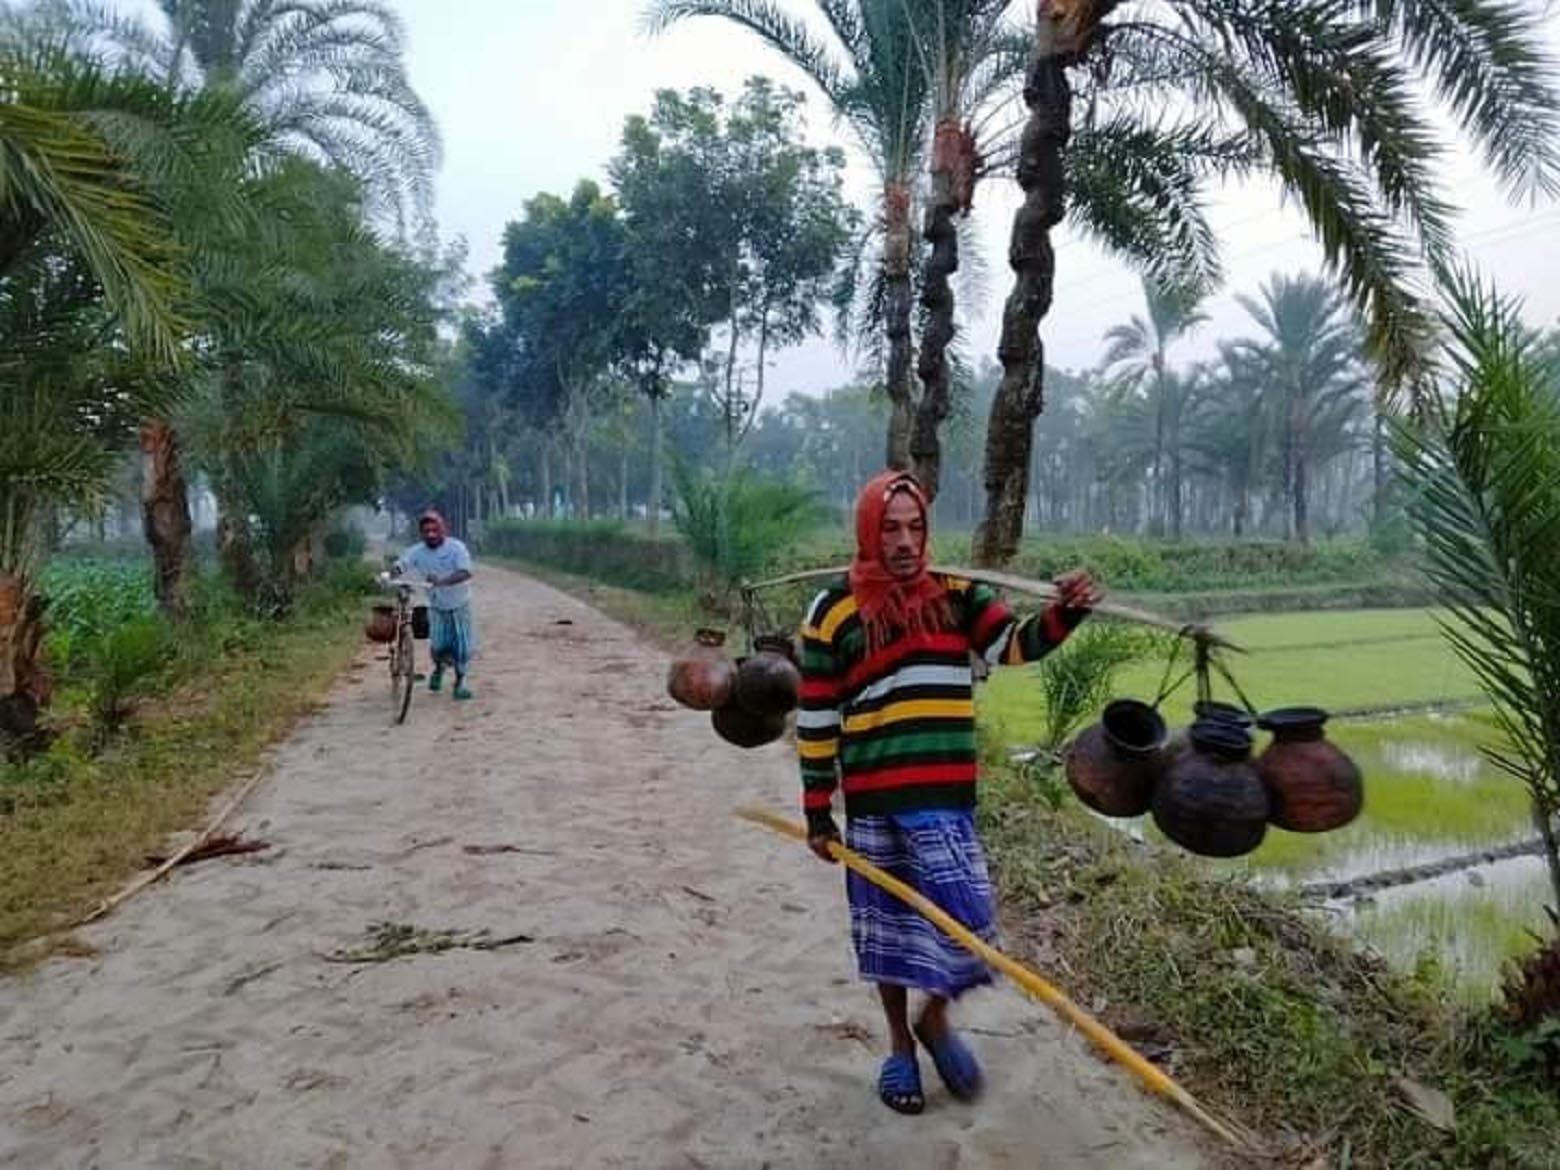 The tree is returning home with date juice. The picture was taken from Singia village in Kotchandpur upazila of Jhenaidah.